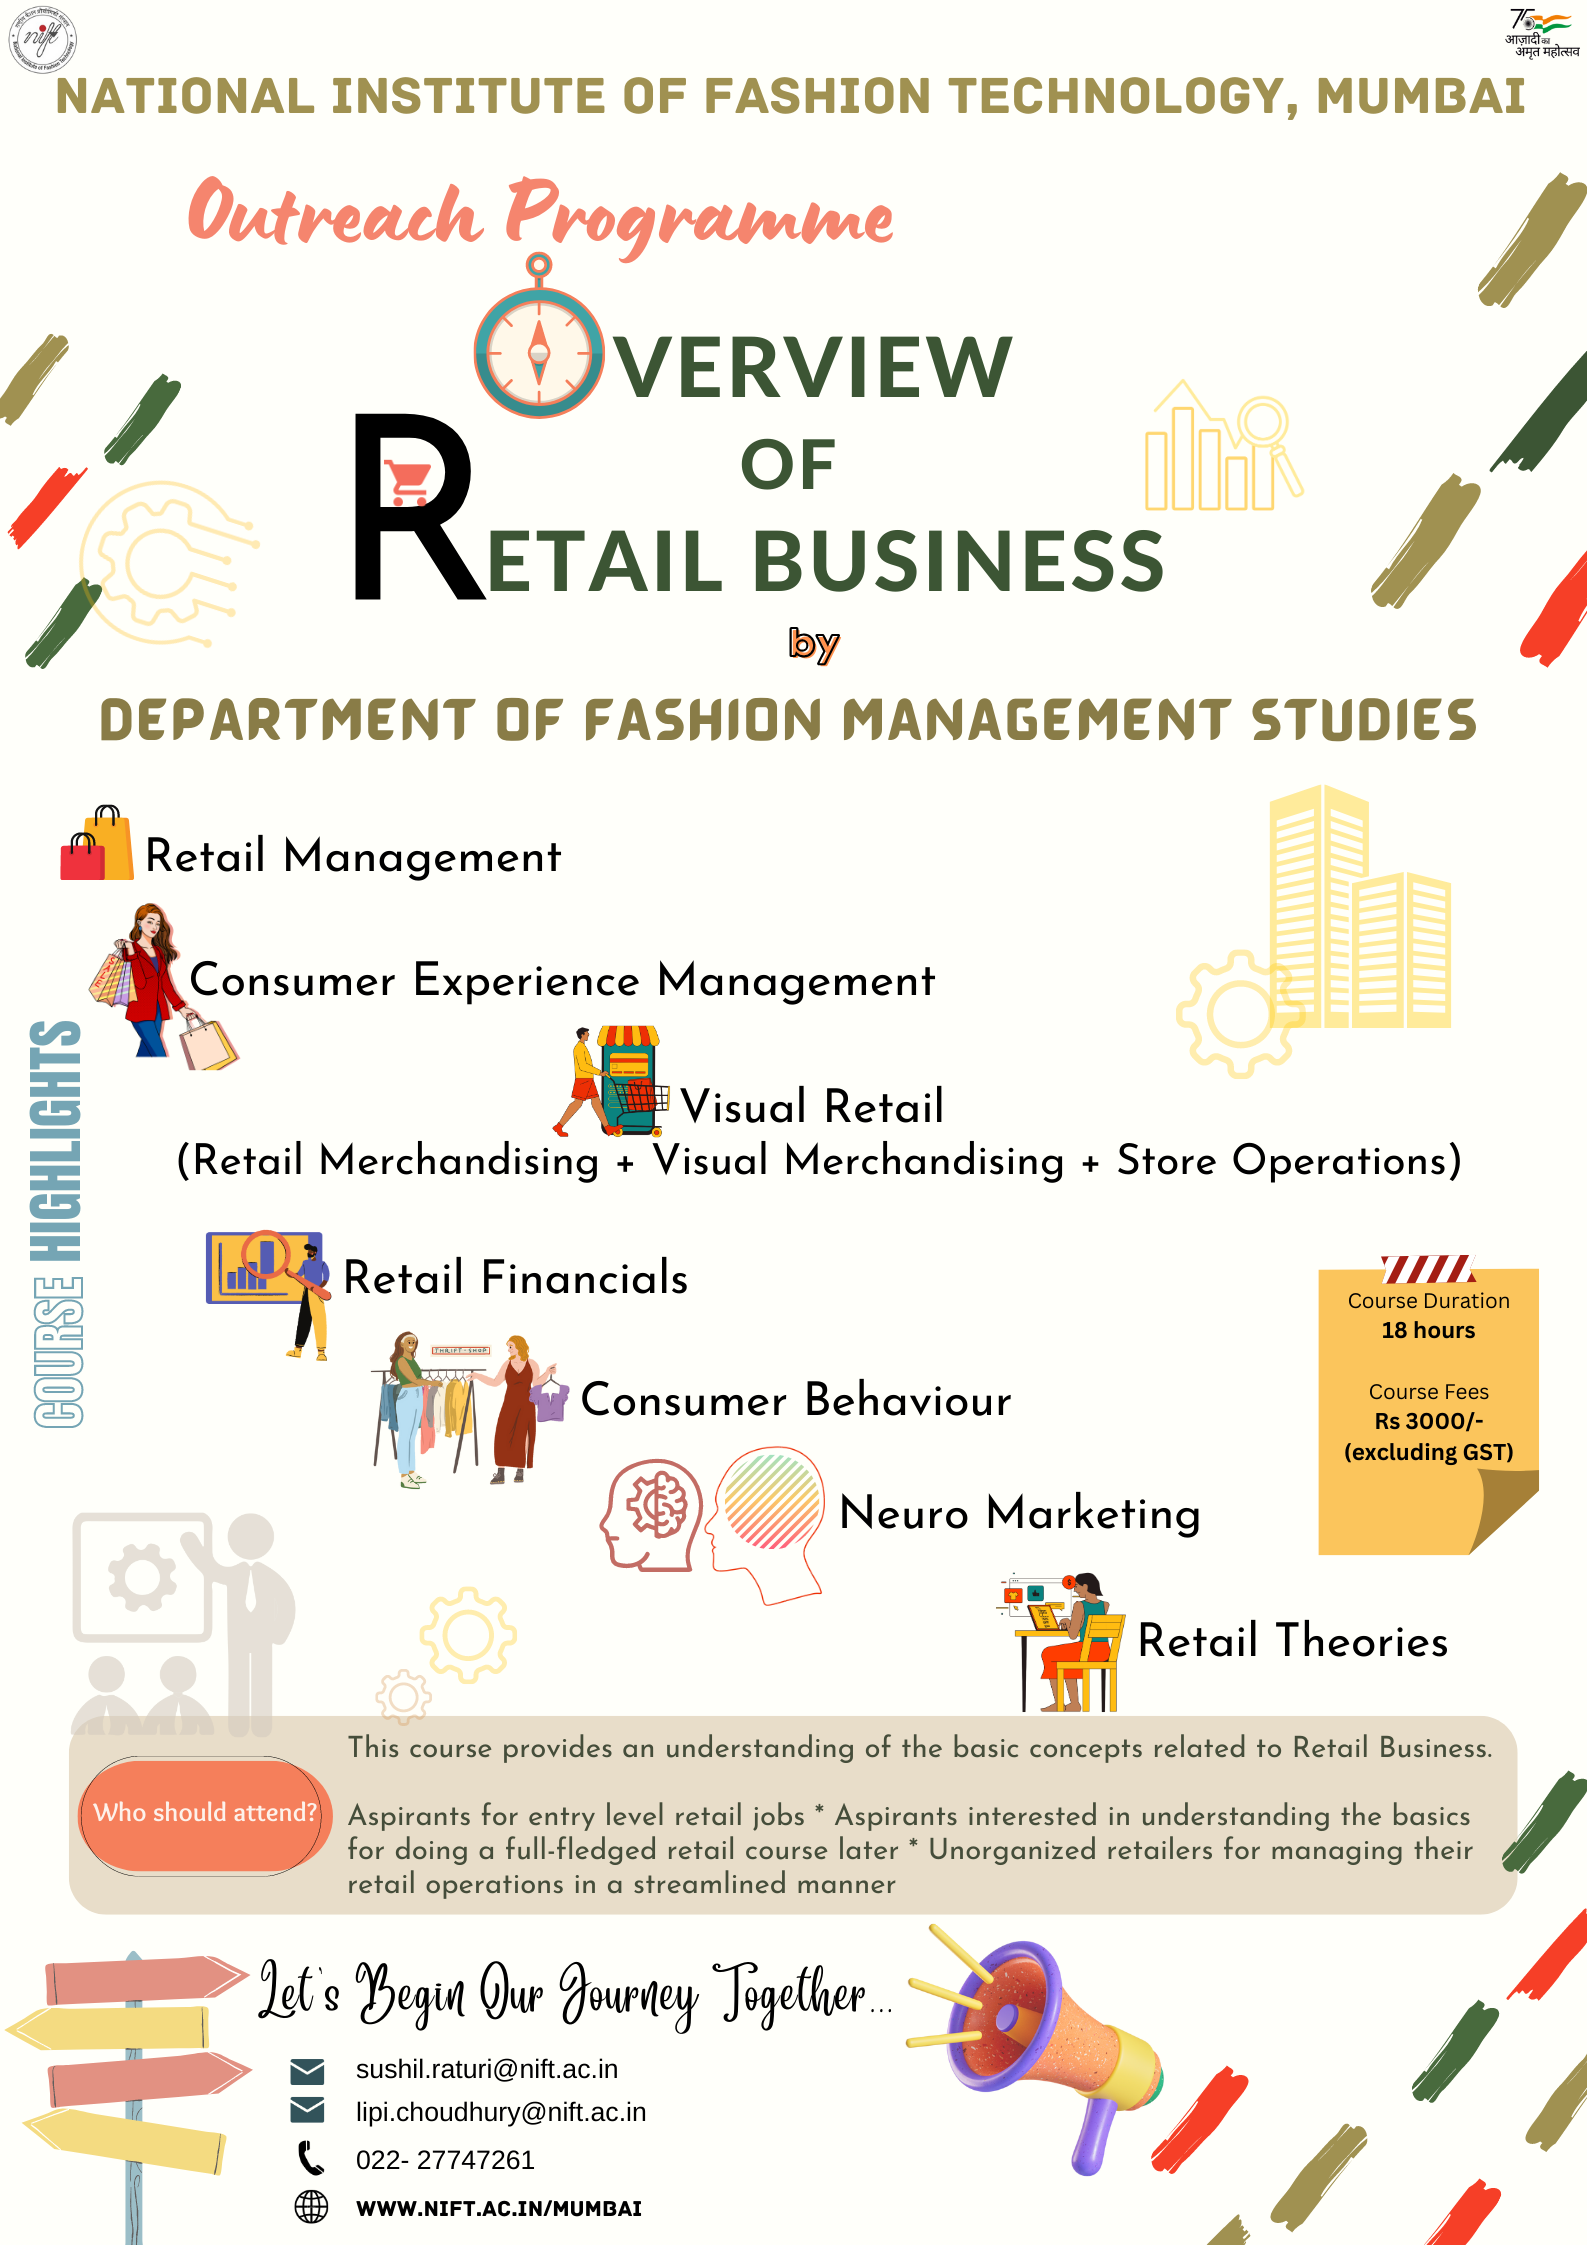 Overview of Retail Business